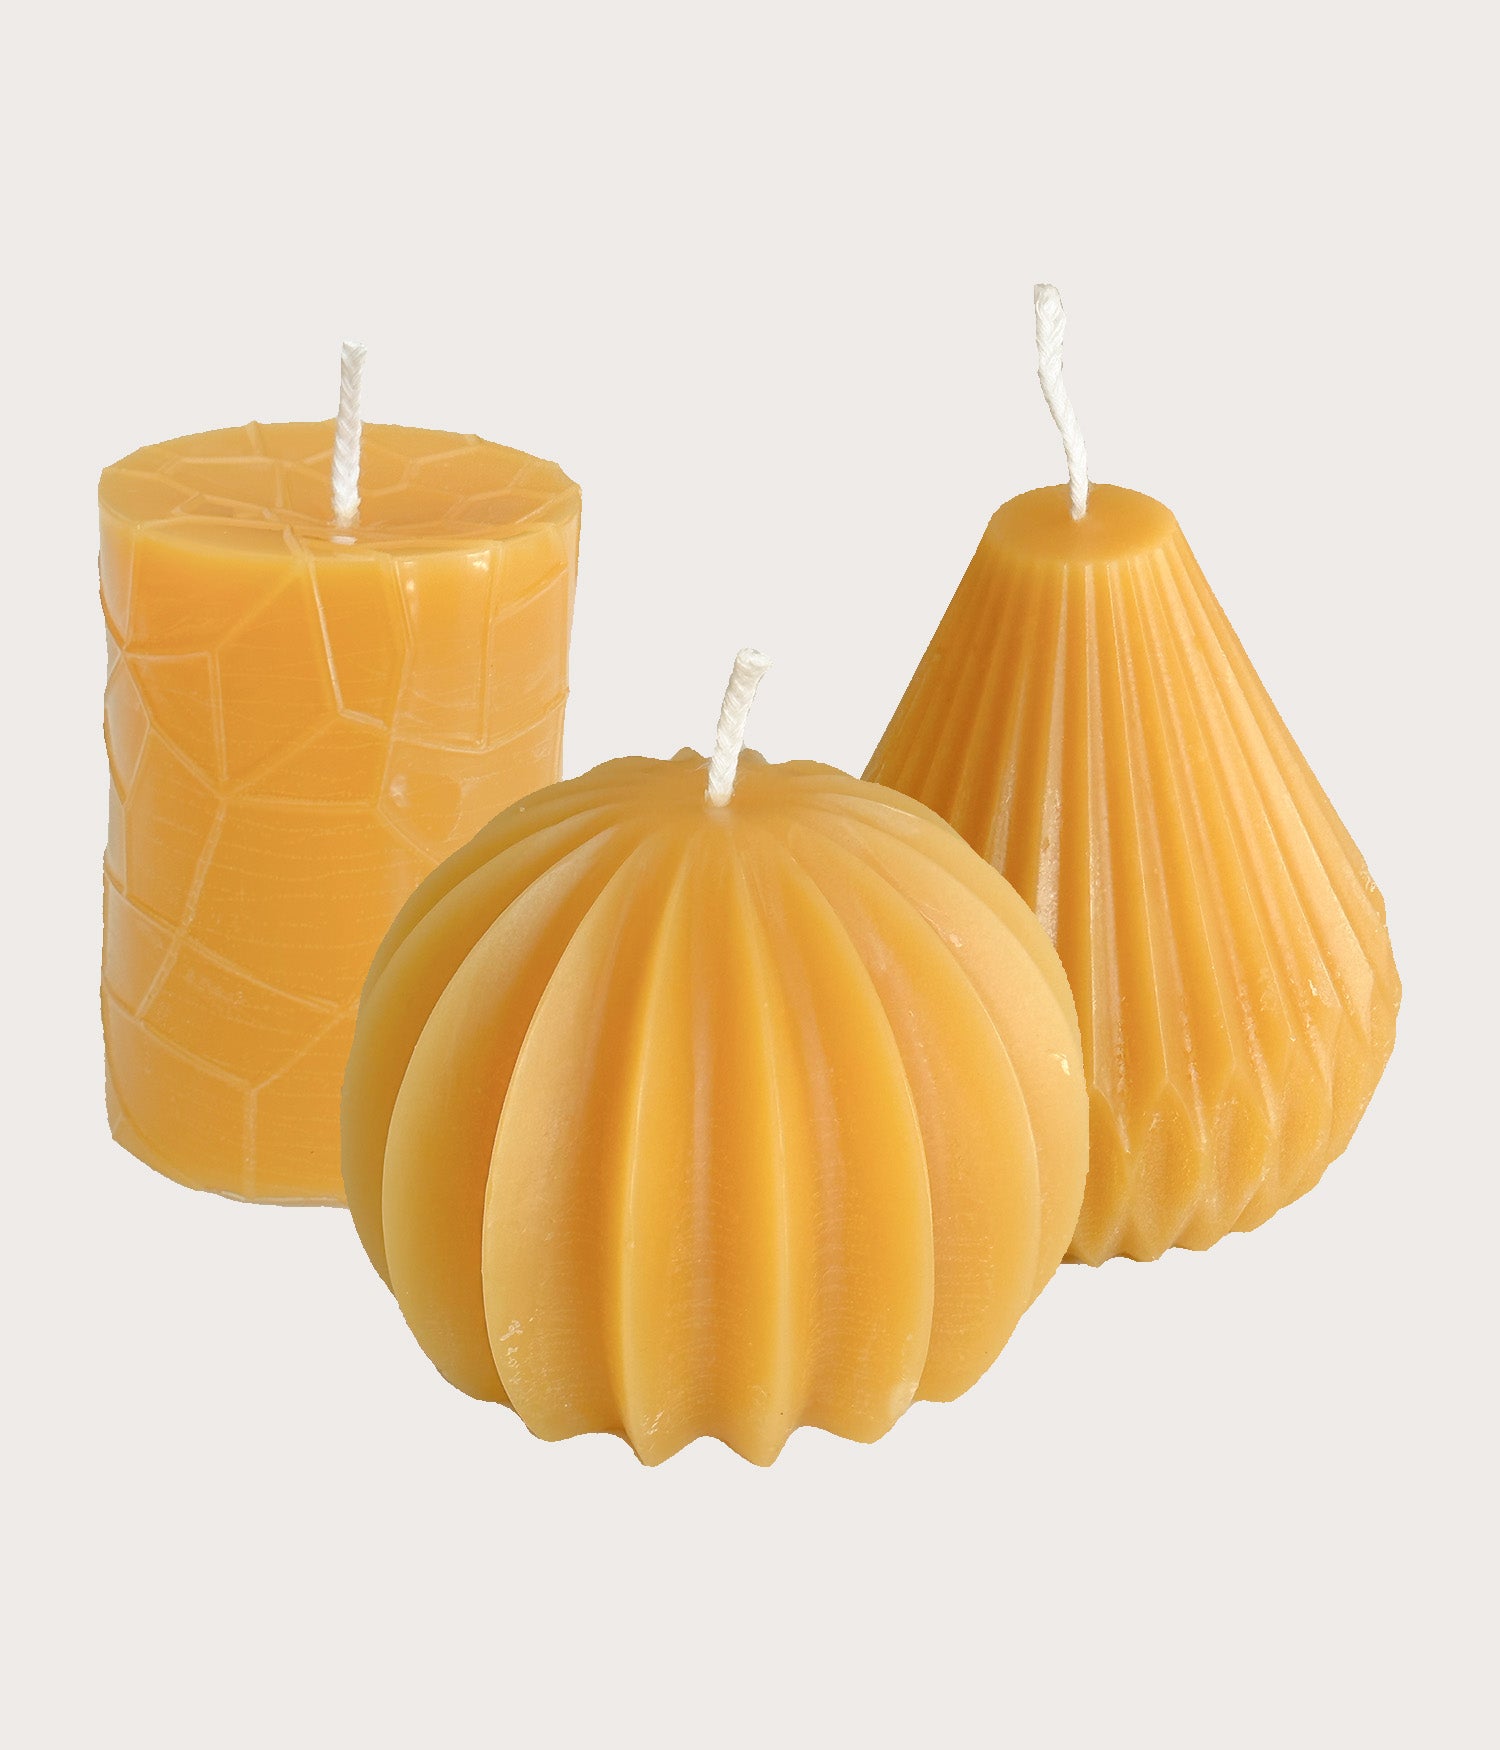 Beeswax candles - Small package